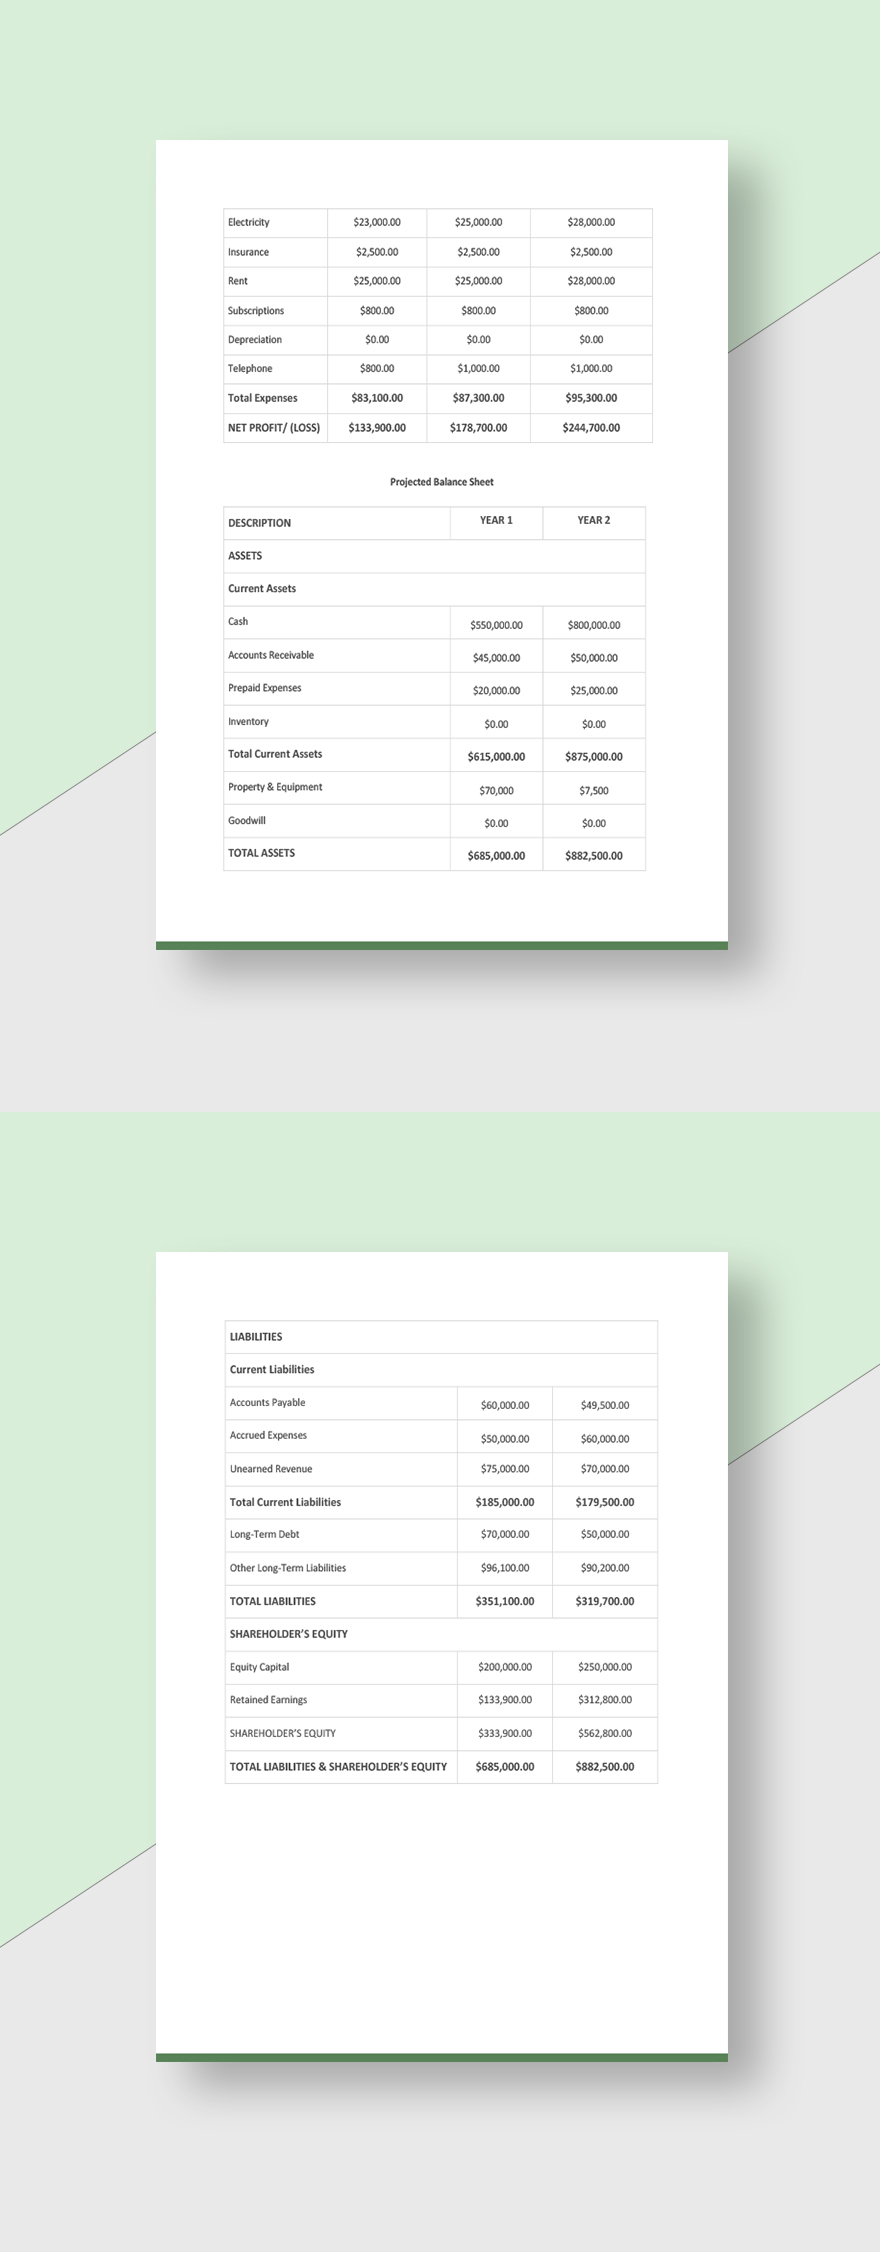 Editable Advertising Agency Business Plan Template